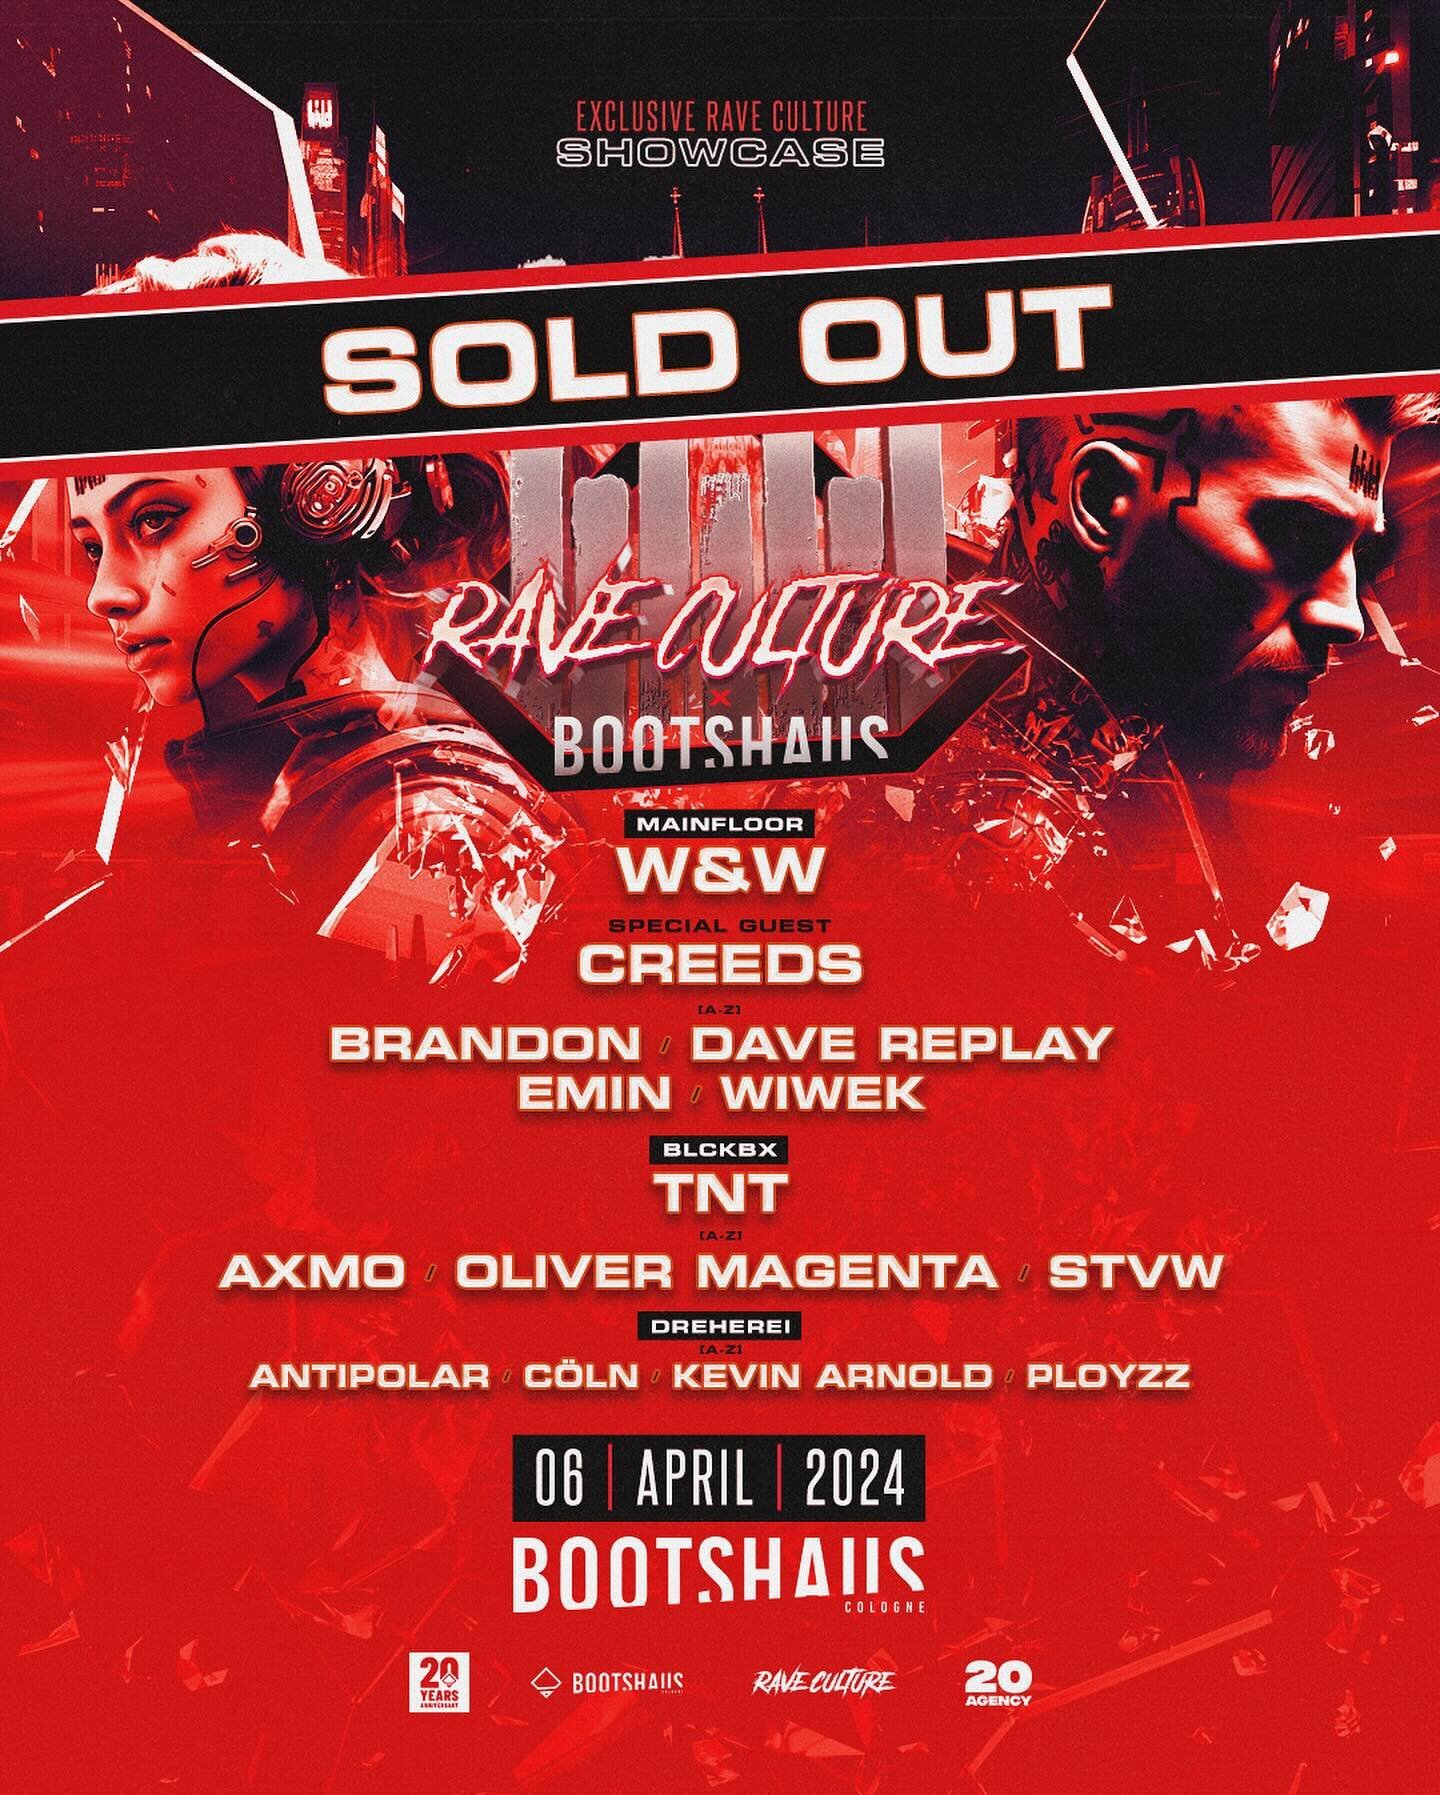 RAVE CULTURE x BOOTSHAUS IS SOLD OUT!! 🚨 Swipe for the exclusive T-Shirt and Timetable, see you tonight! 🔥